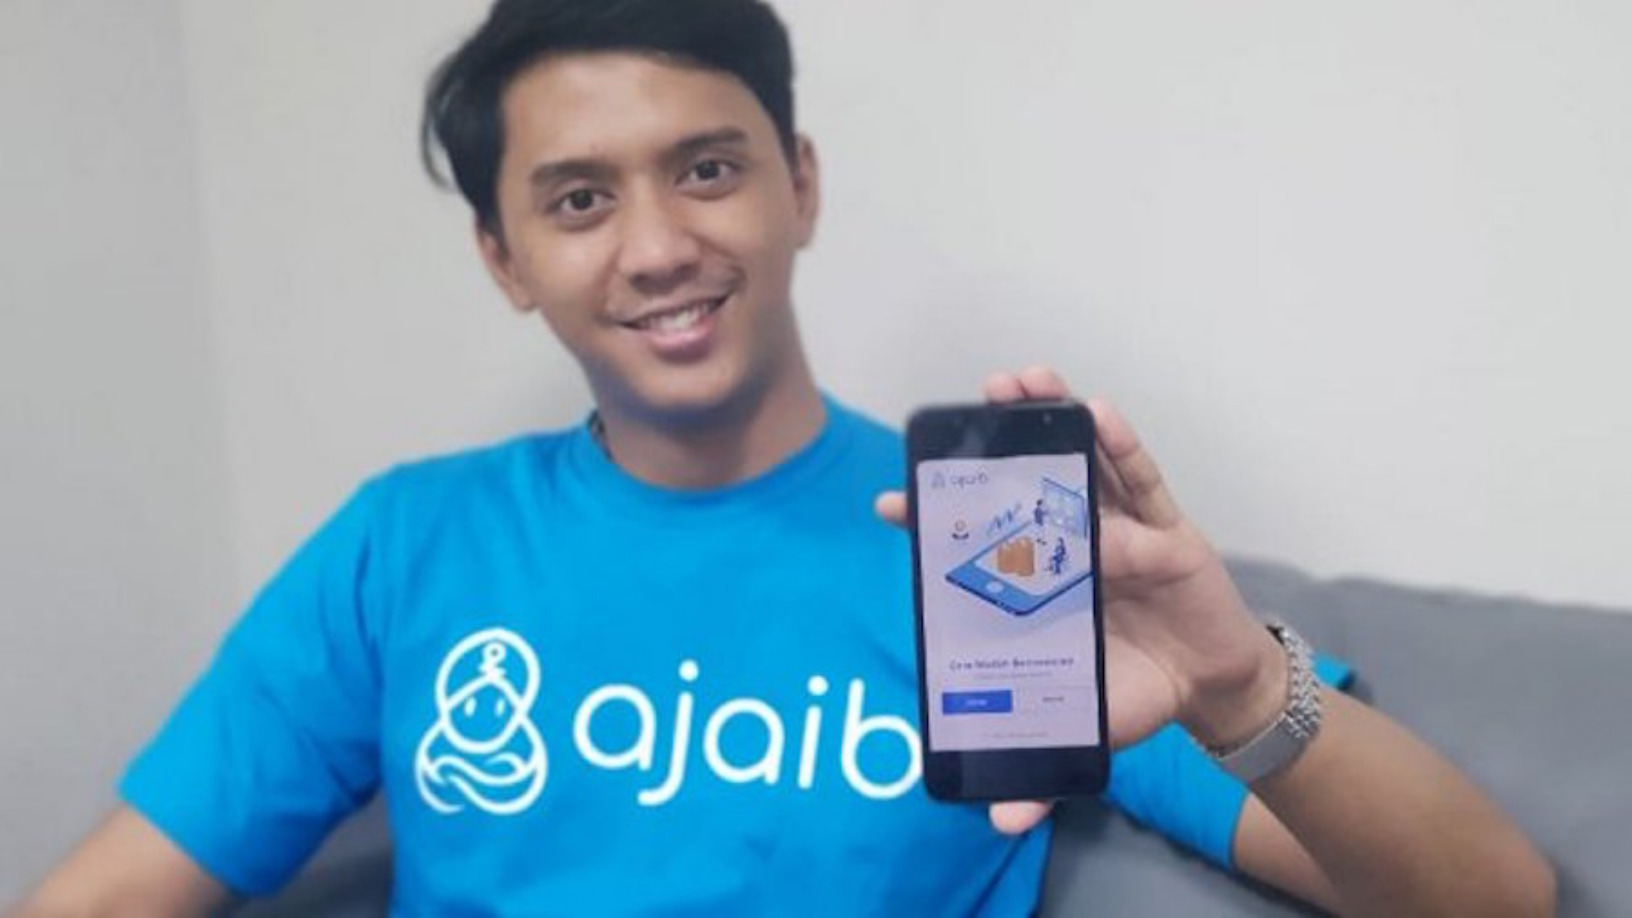 Ajaib targets millennials with easy-to-use investment app